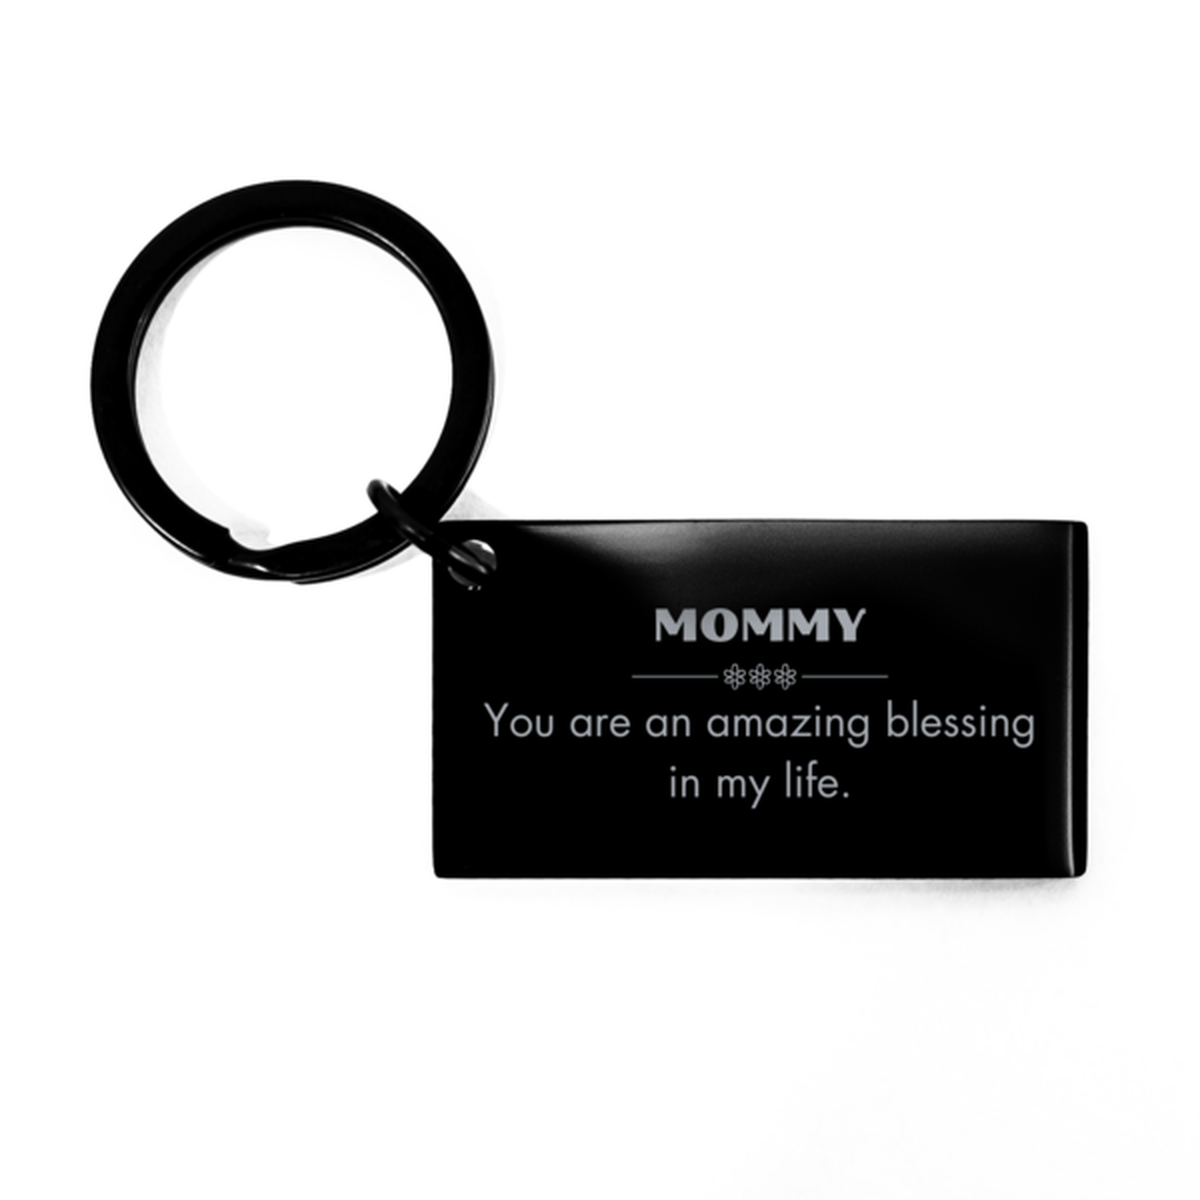 Mommy Keychain, You are an amazing blessing in my life, Thank You Gifts For Mommy, Inspirational Birthday Christmas Unique Gifts For Mommy